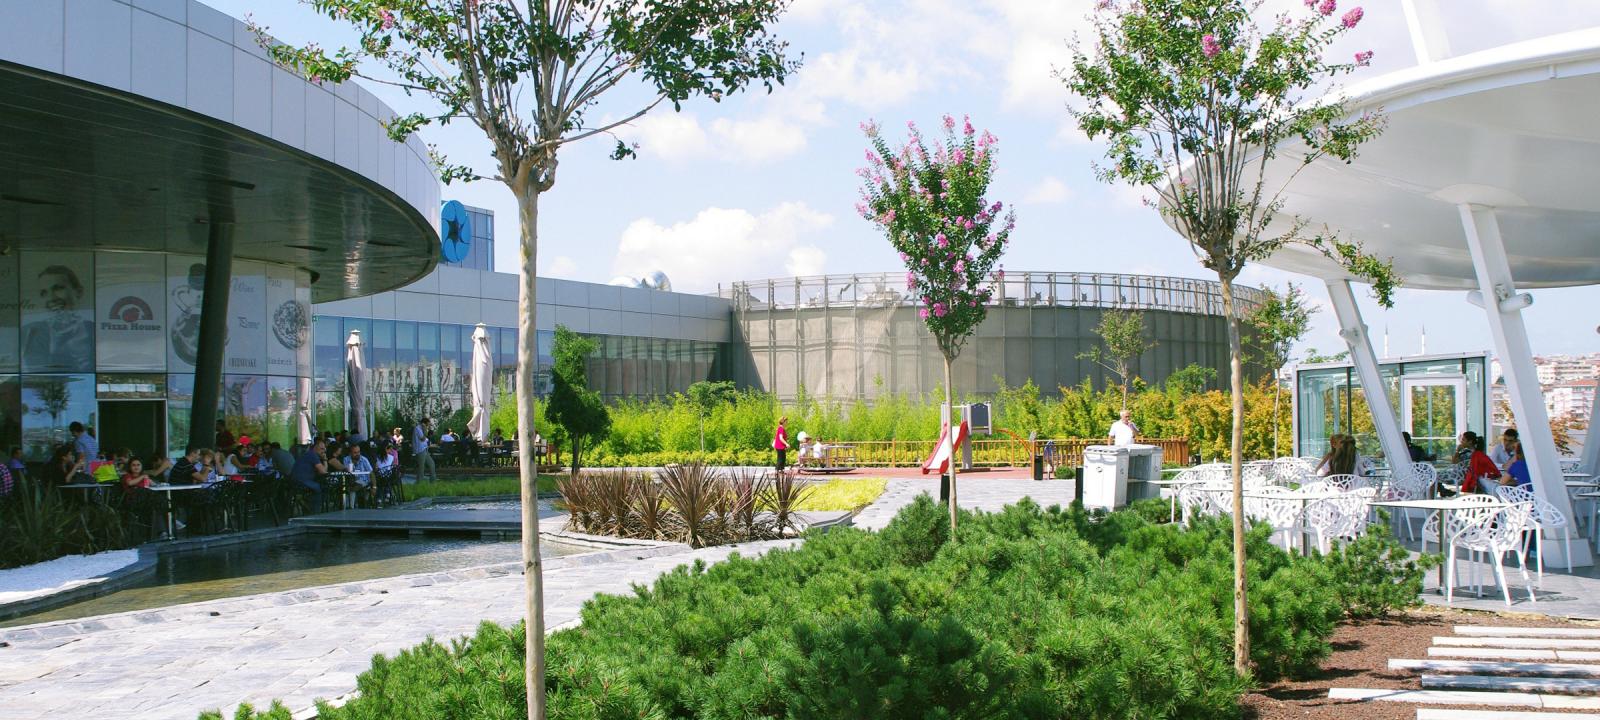 People sitting on a roof garden with walkways, blossoming small trees and shrubs